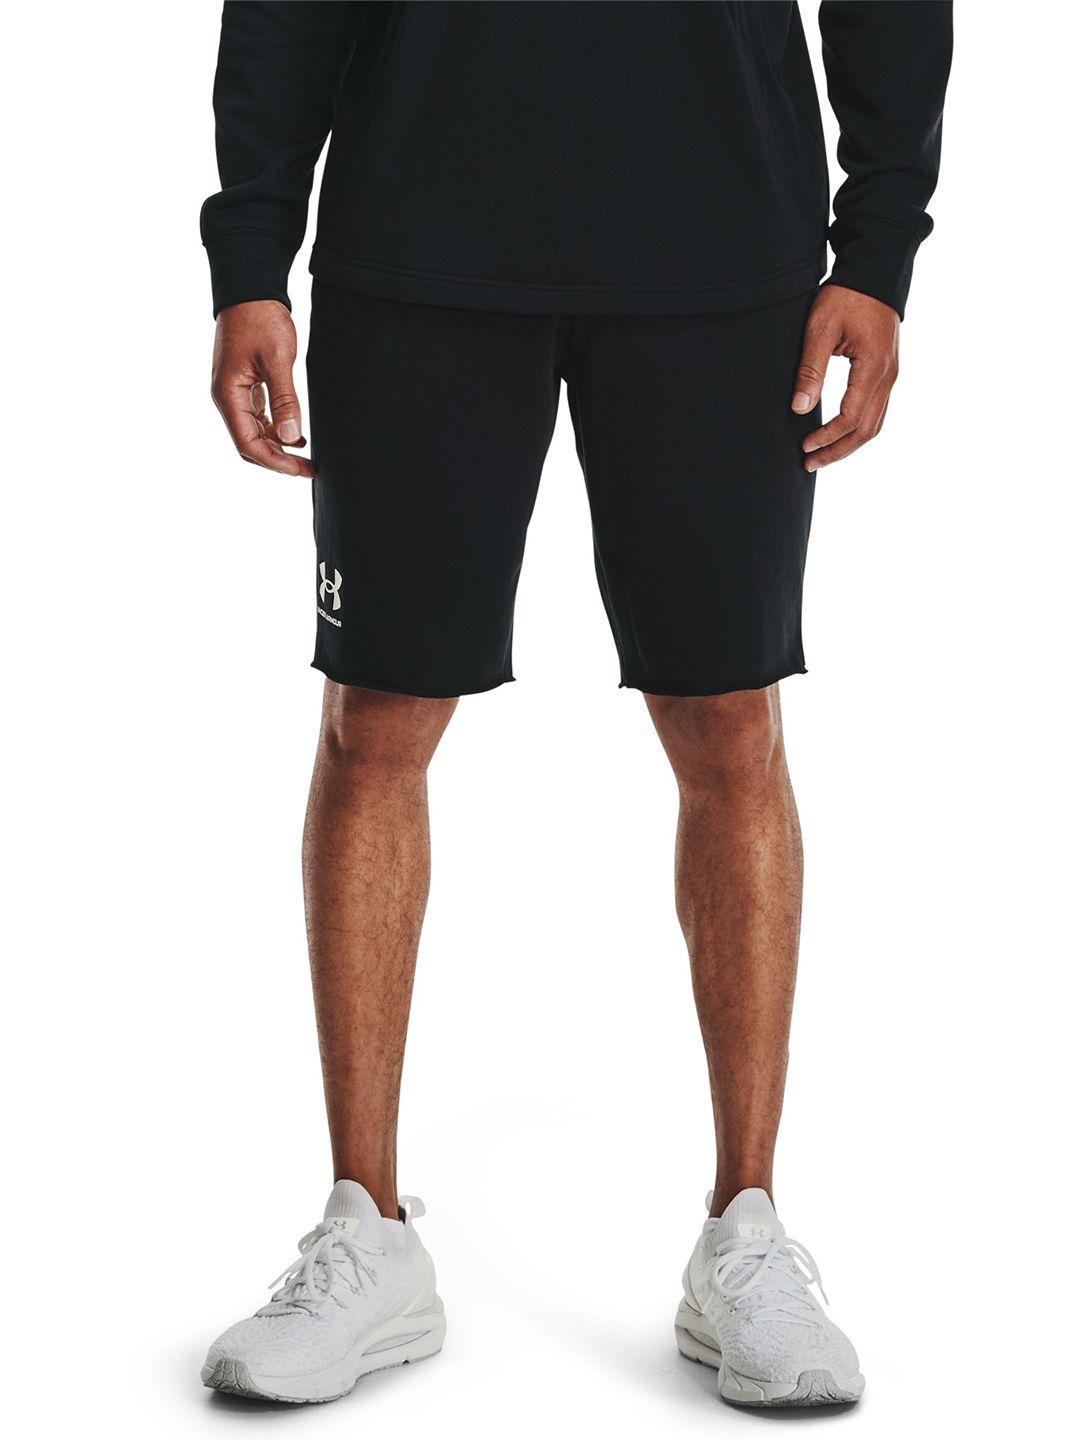 under-armour-men-low-rise-training-or-gym-sports-shorts